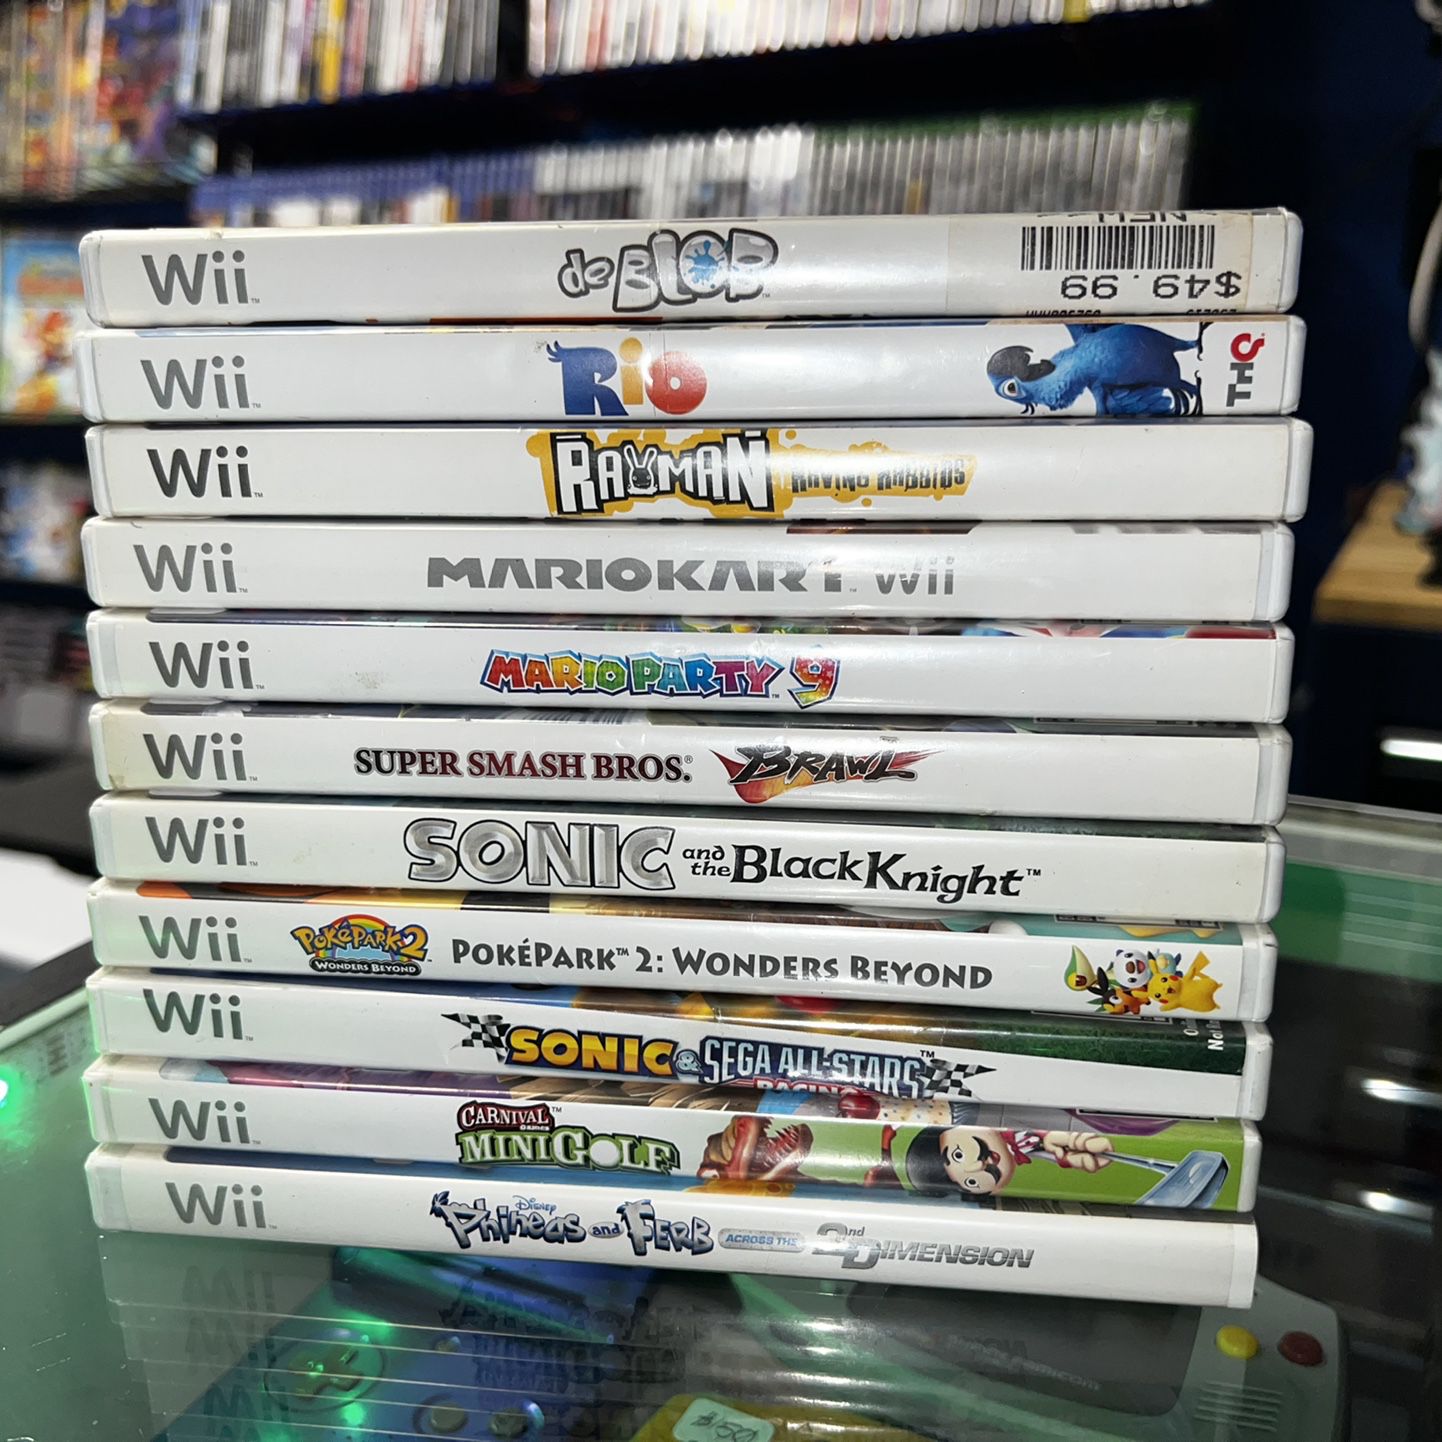 acceso Alabama Post impresionismo Nintendo Wii Games - Prices Listed In Ad Please Read *TRADE IN YOUR OLD  GAMES FOR CREDIT TOWARDS THIS ITEM* for Sale in Perris, CA - OfferUp